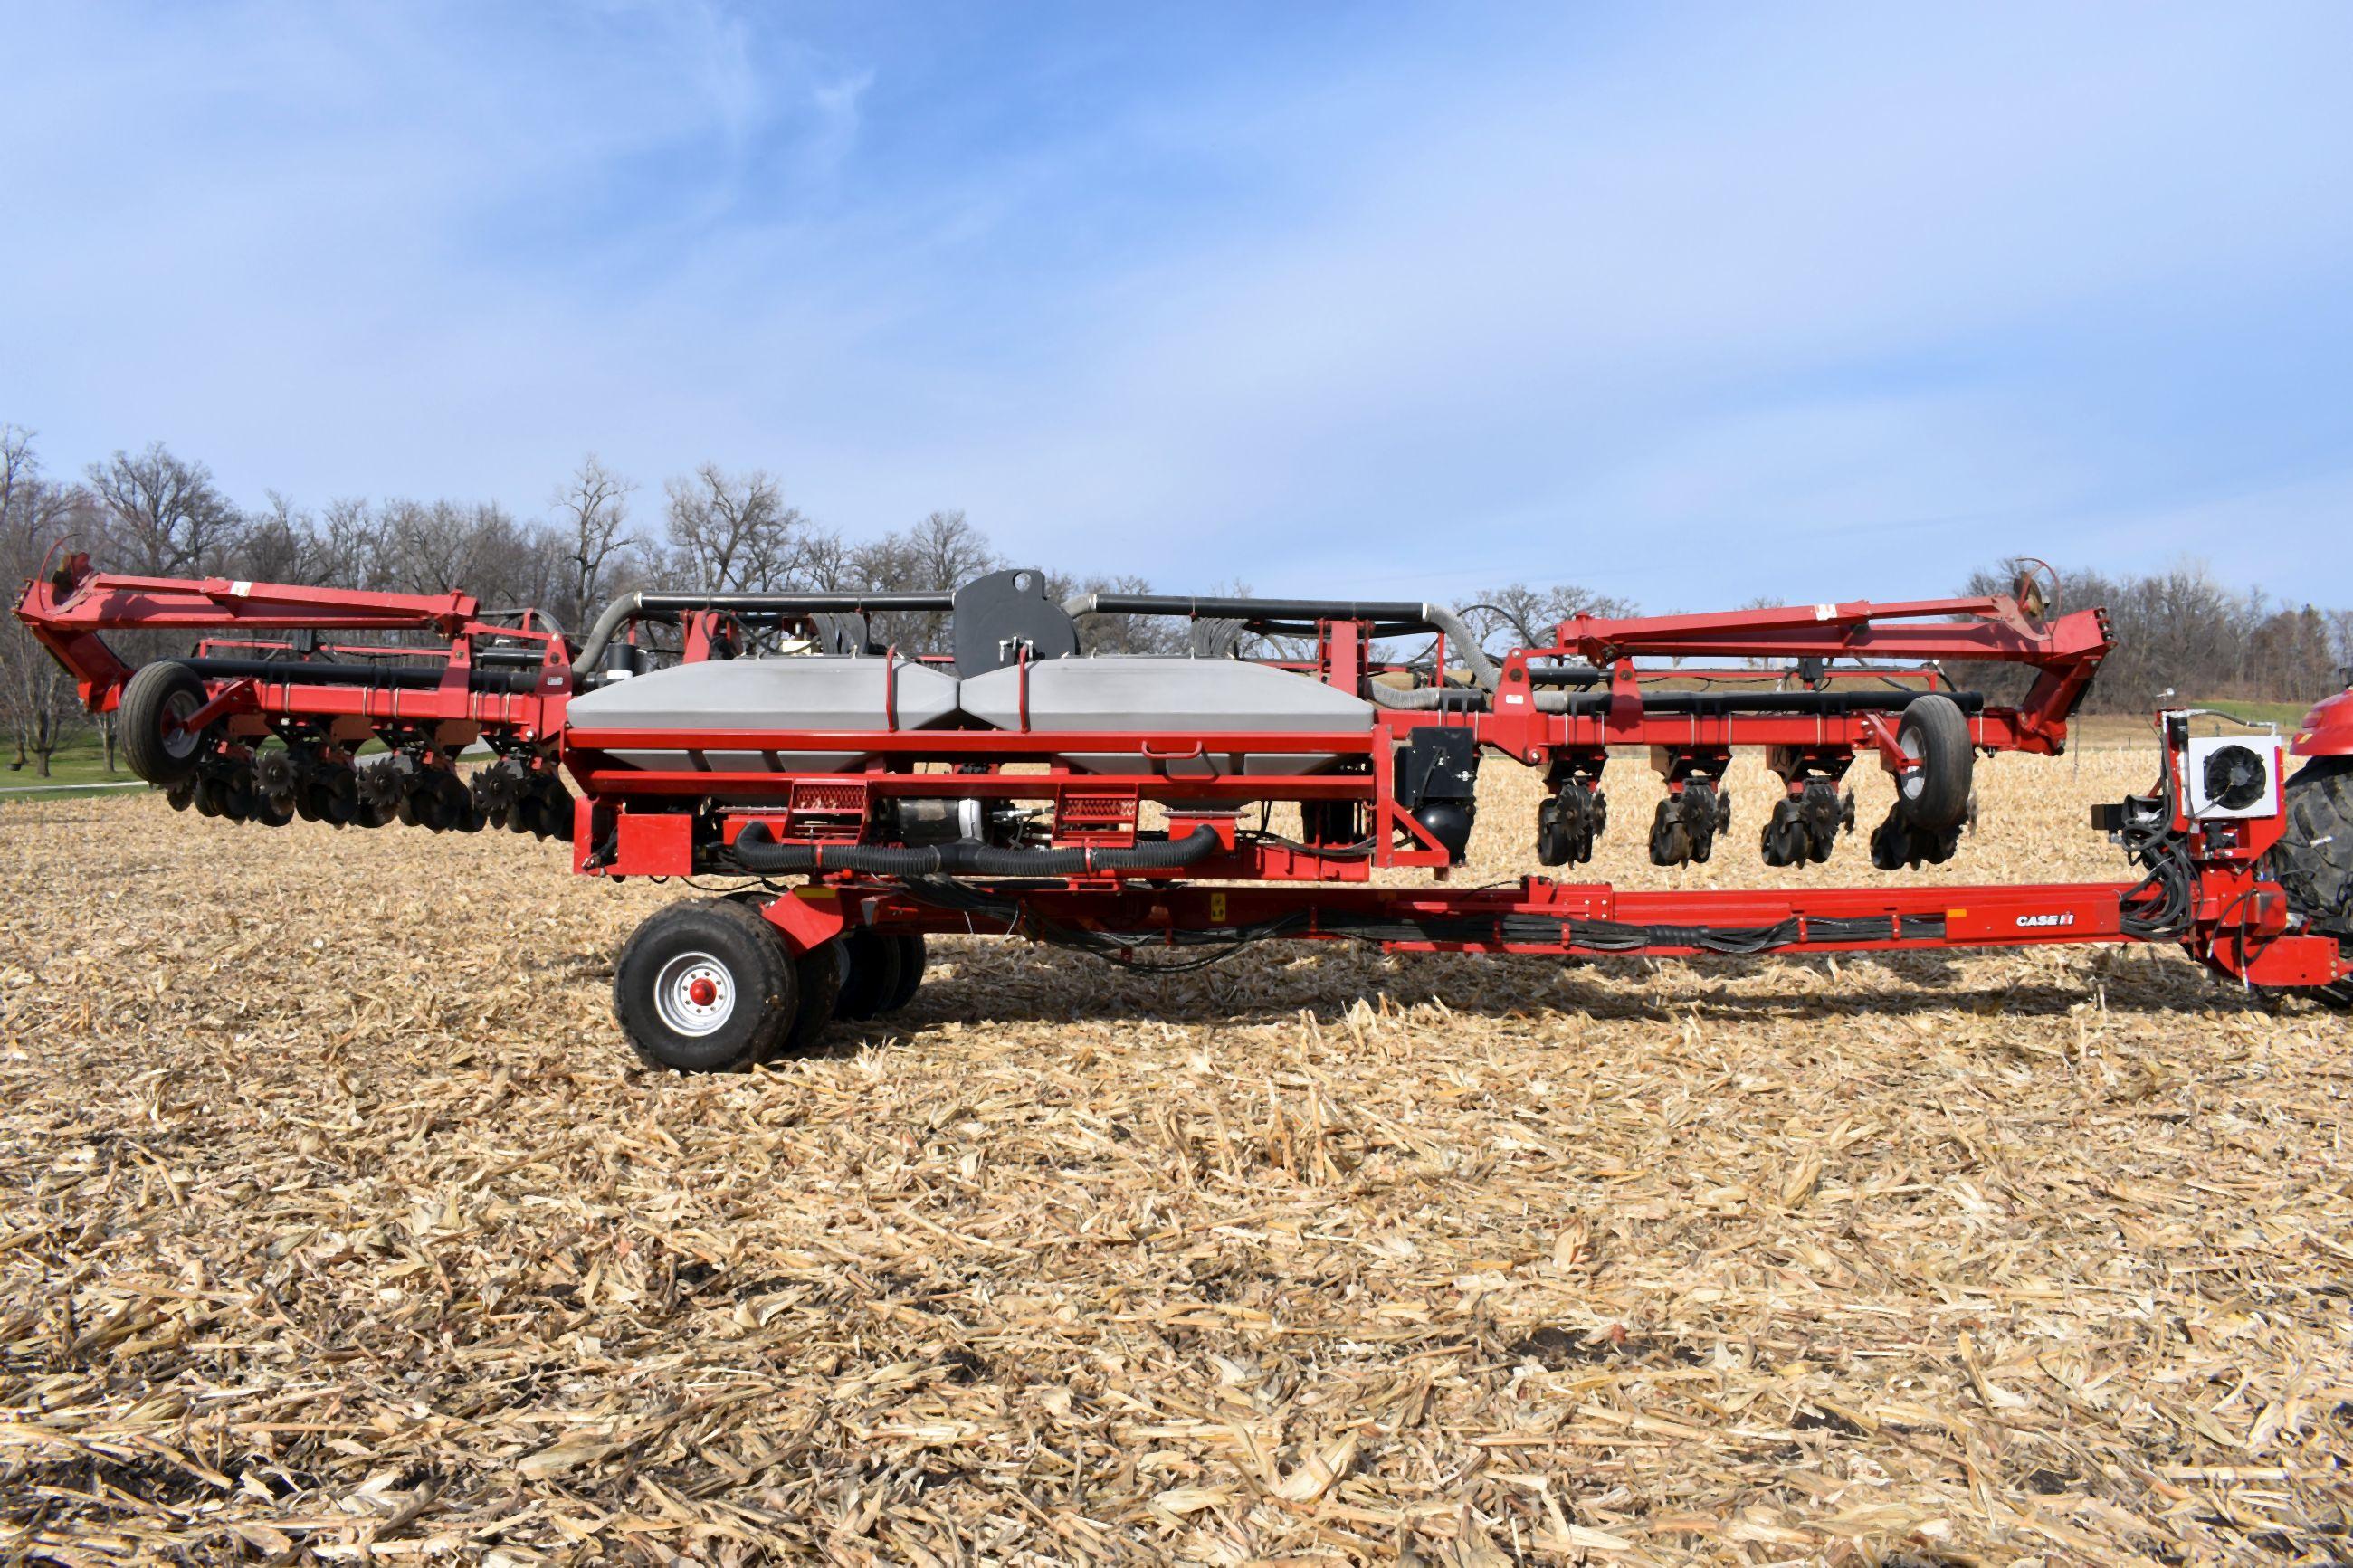 2011 Case IH 1240 Early Riser Planter, 16 Row 30” Center Pivot, Center Seed, 20/20 Air Force Precisi